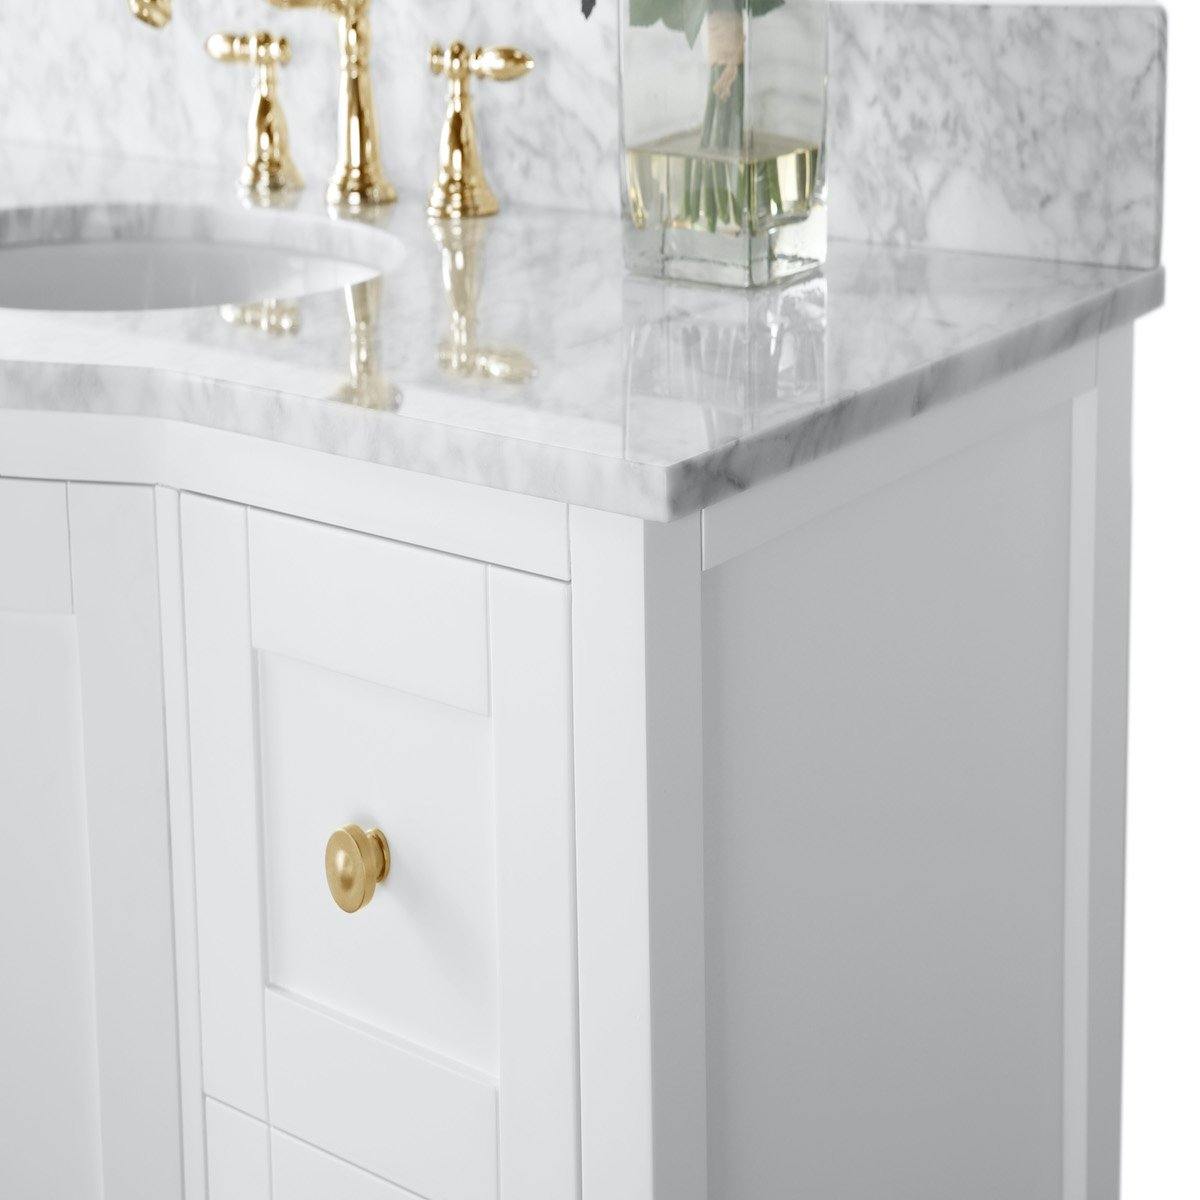 Ancerre Designs Lauren 48 Inch White Single Vanity with Gold Hardware Counter #hardware_gold